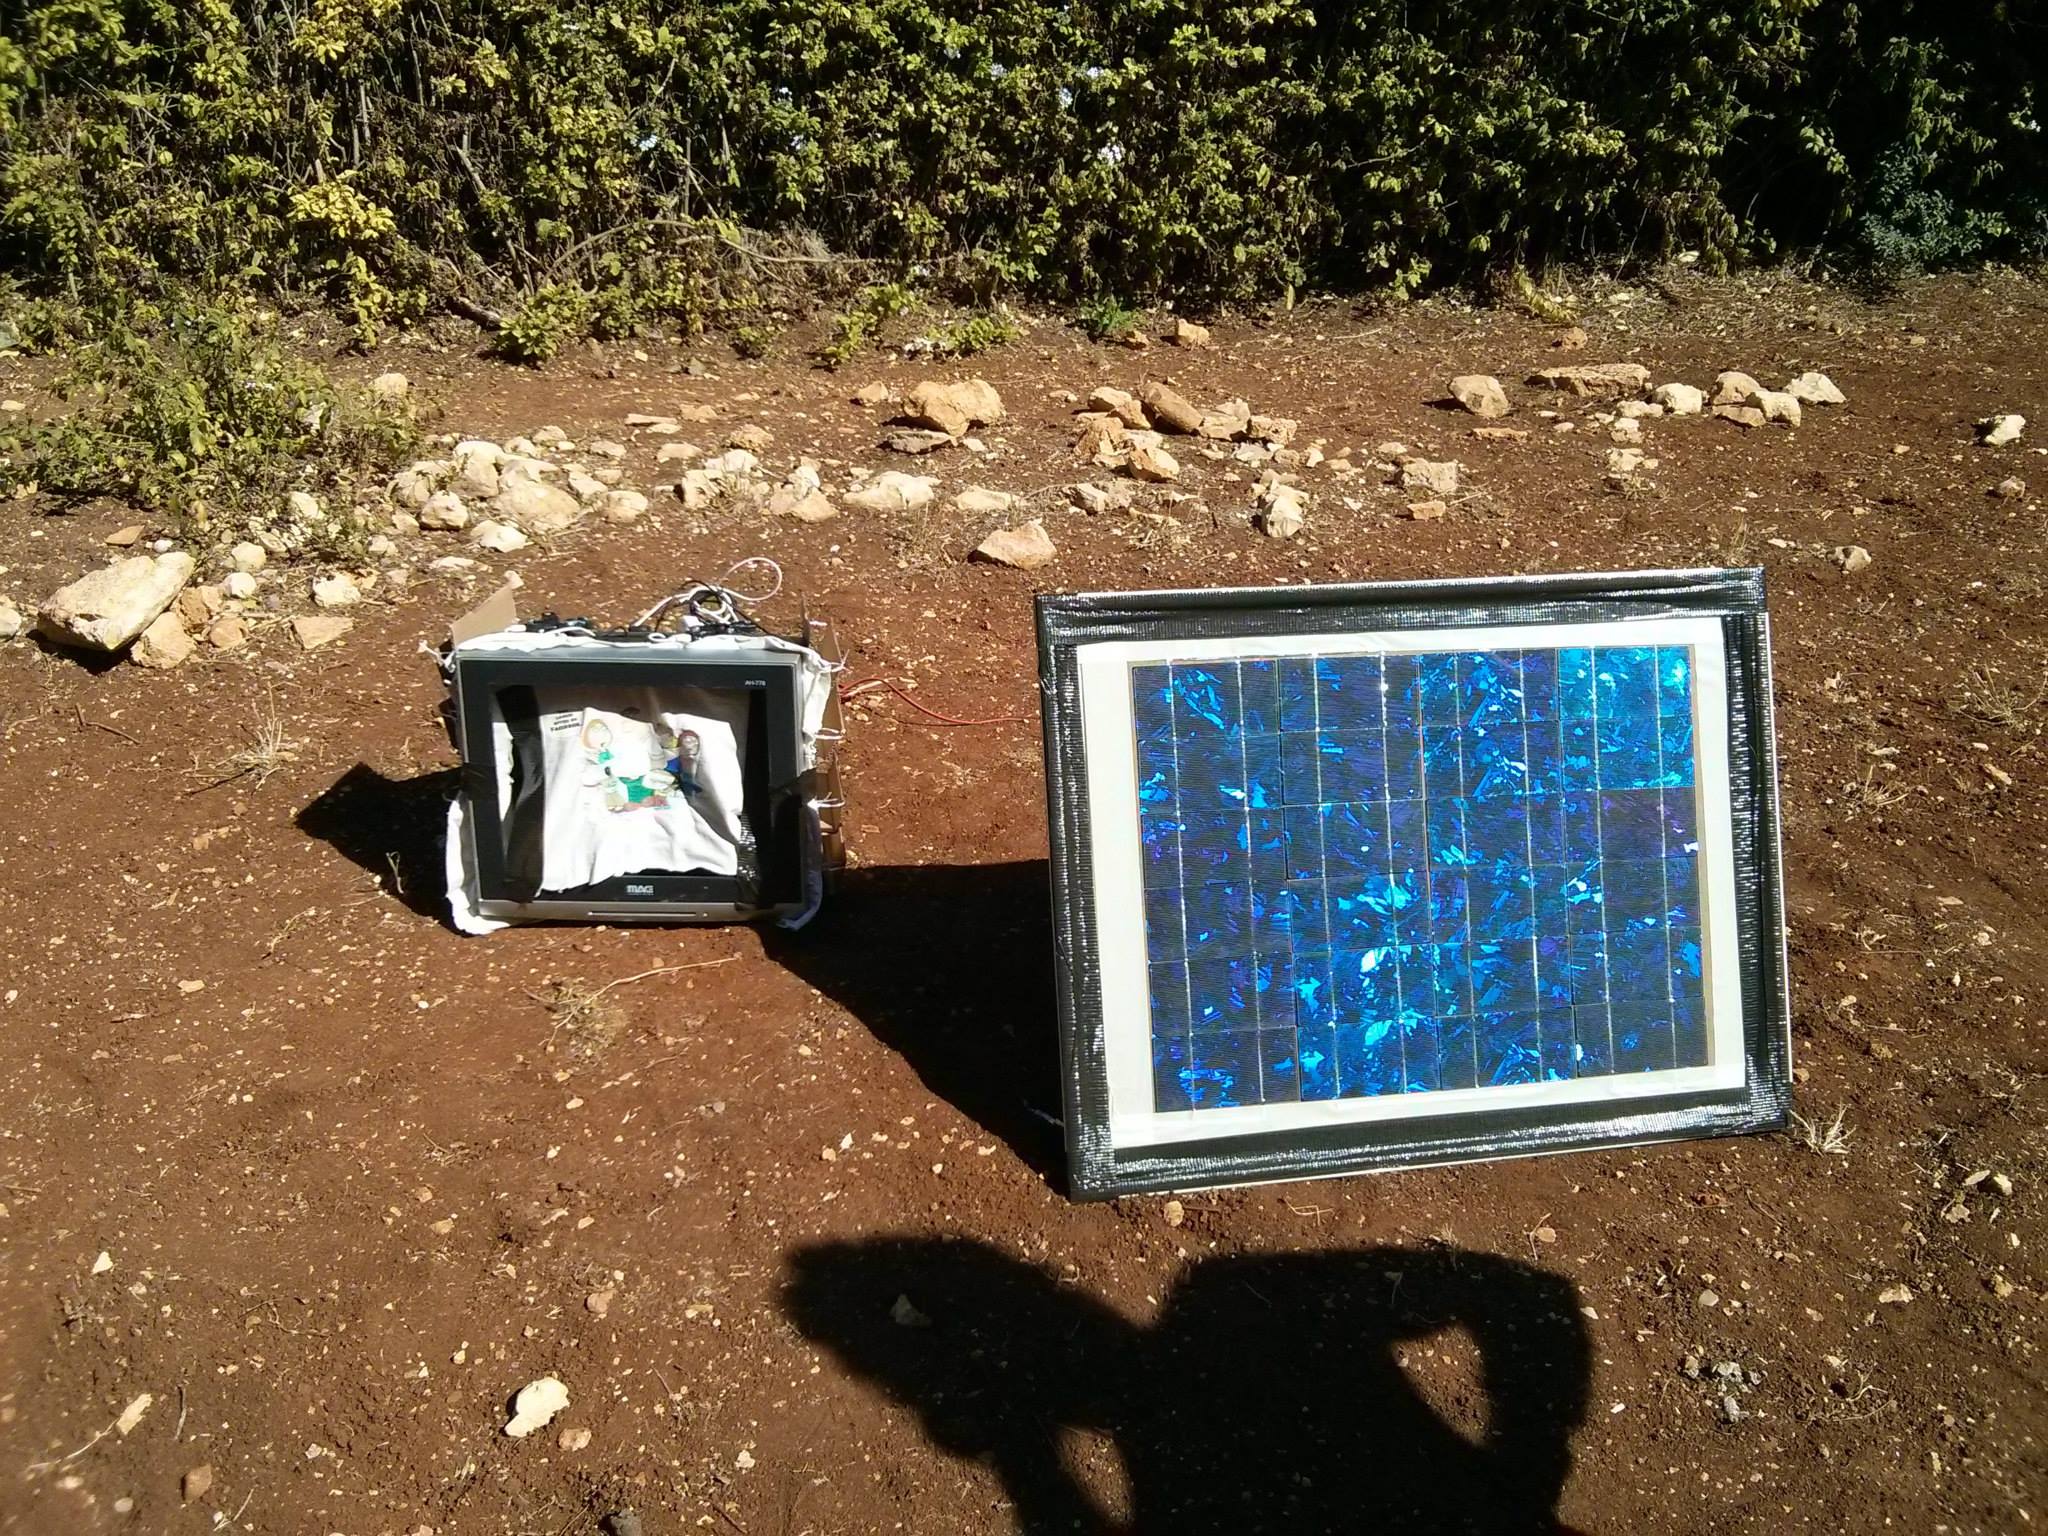 solar phone charging station - First time working